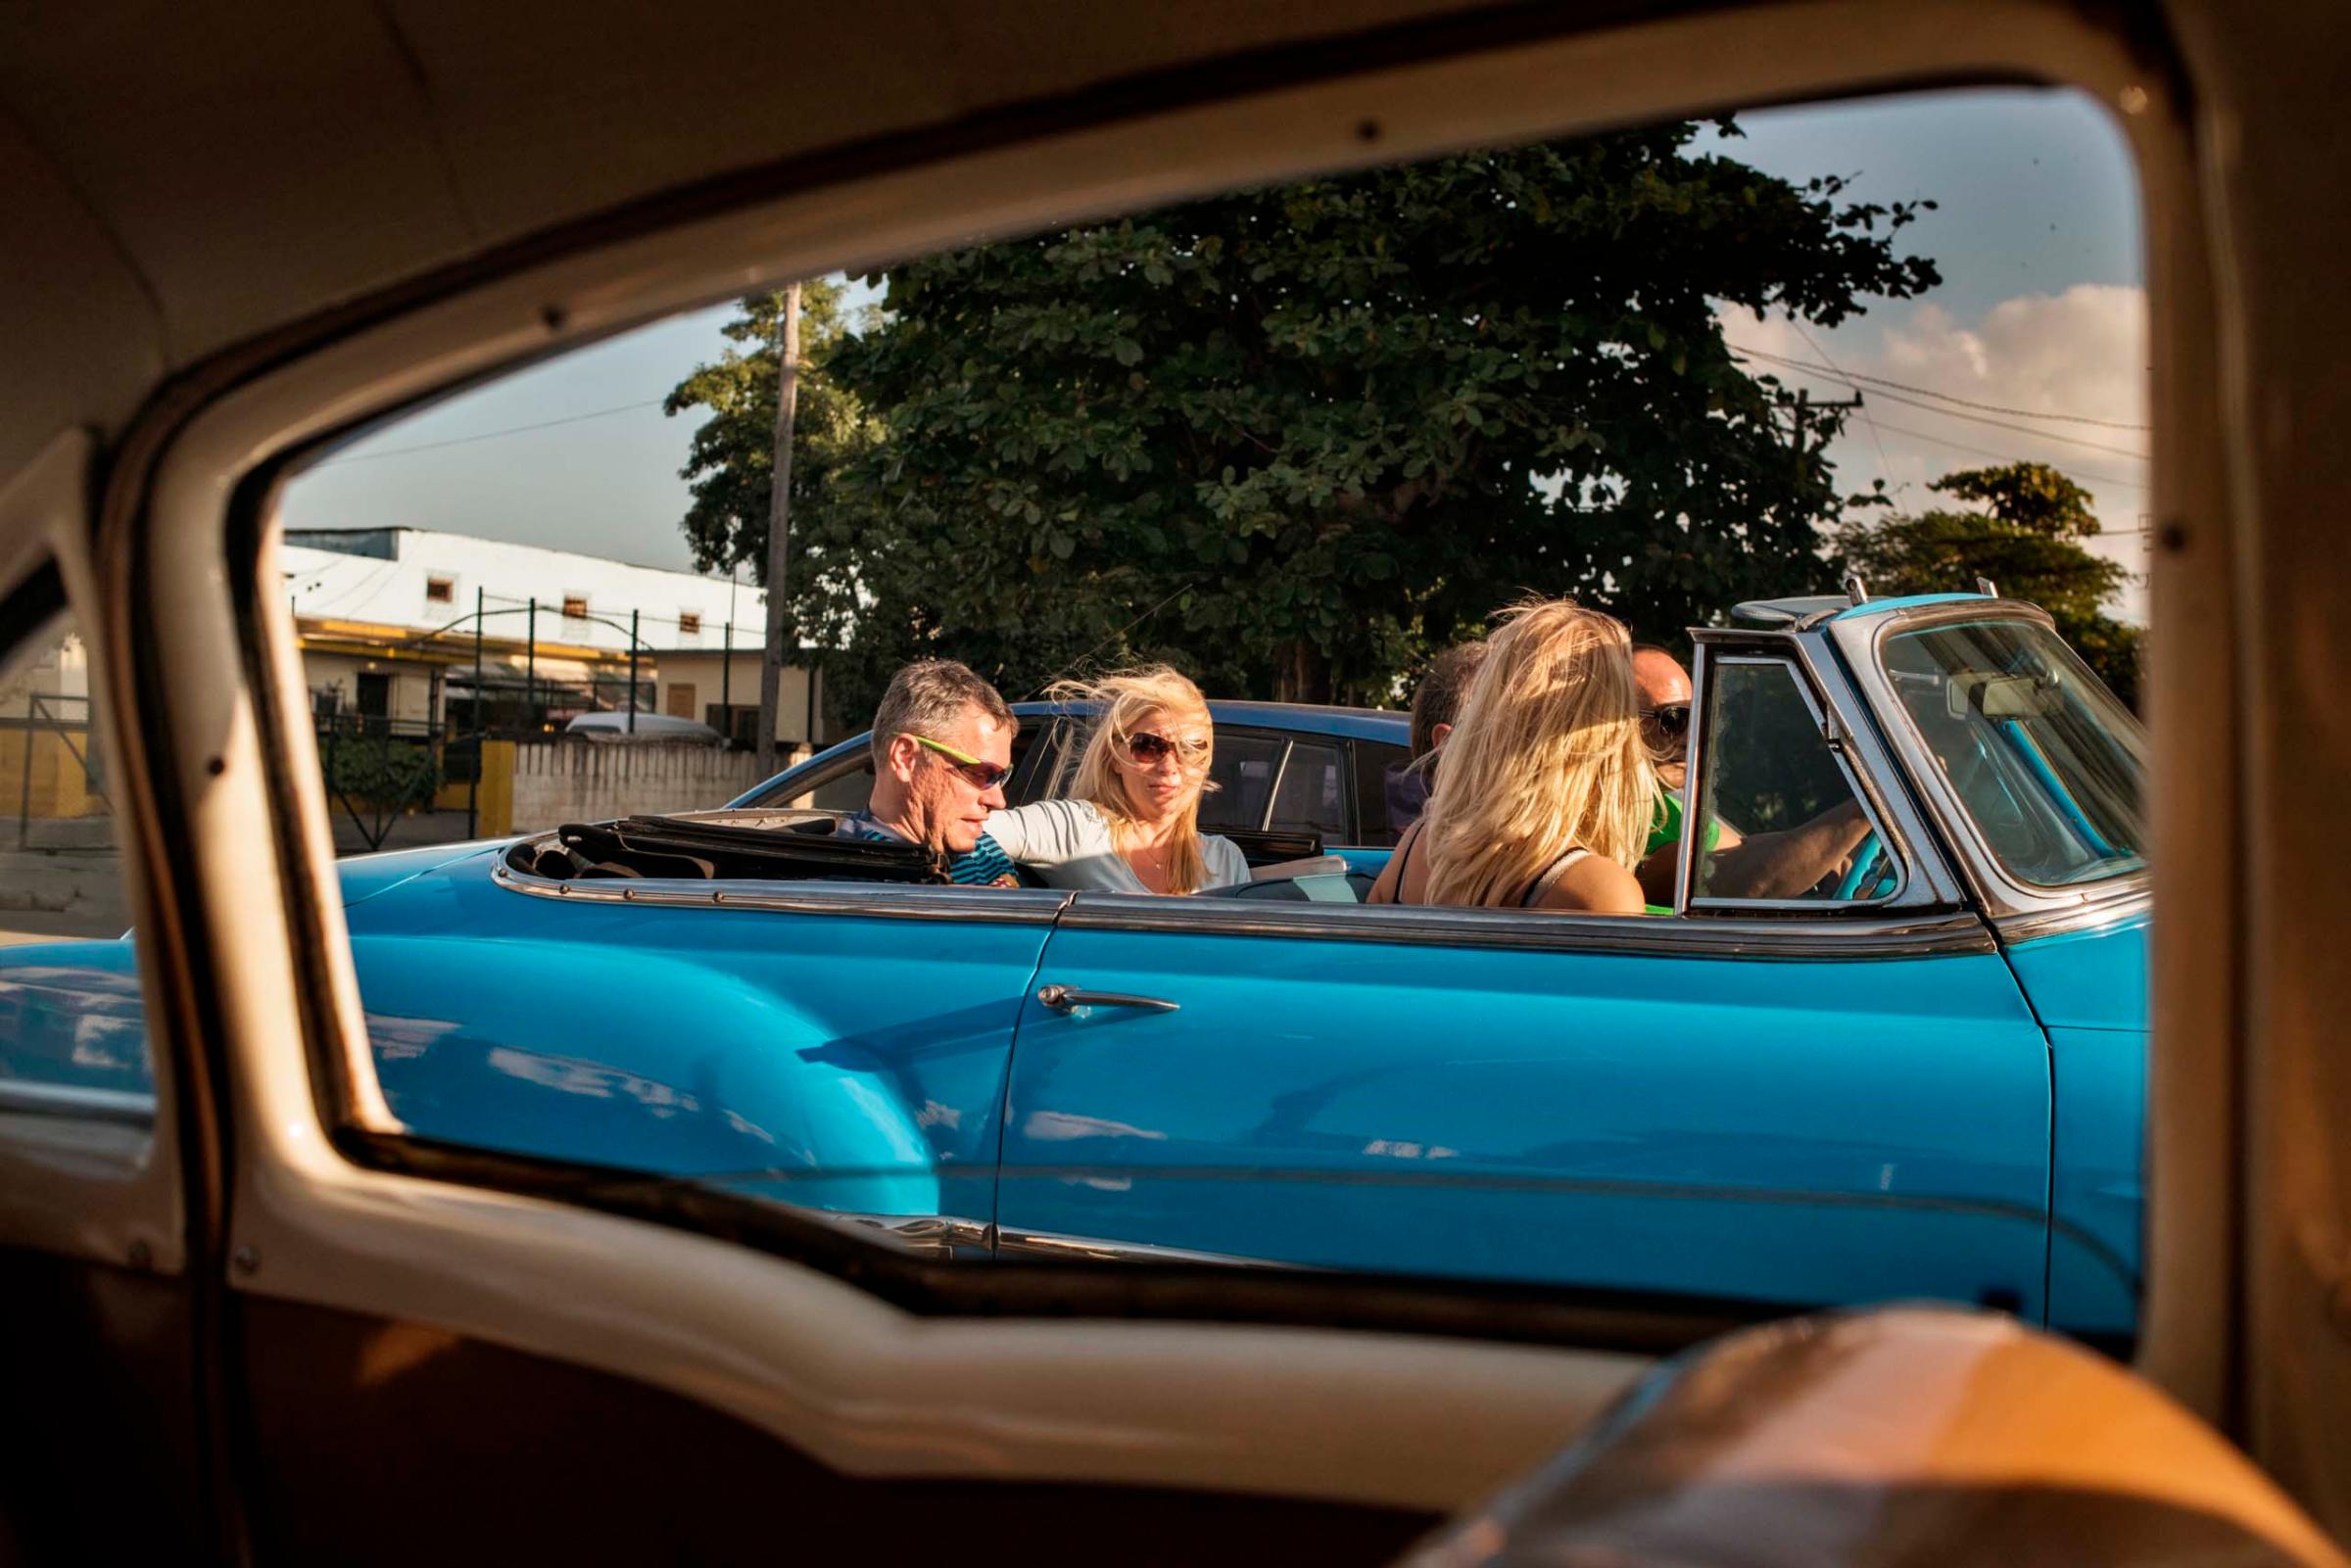 January 2015. Imported to Cuba before the revolution, vintage American cars are often popular with tourists cruising around Havana.